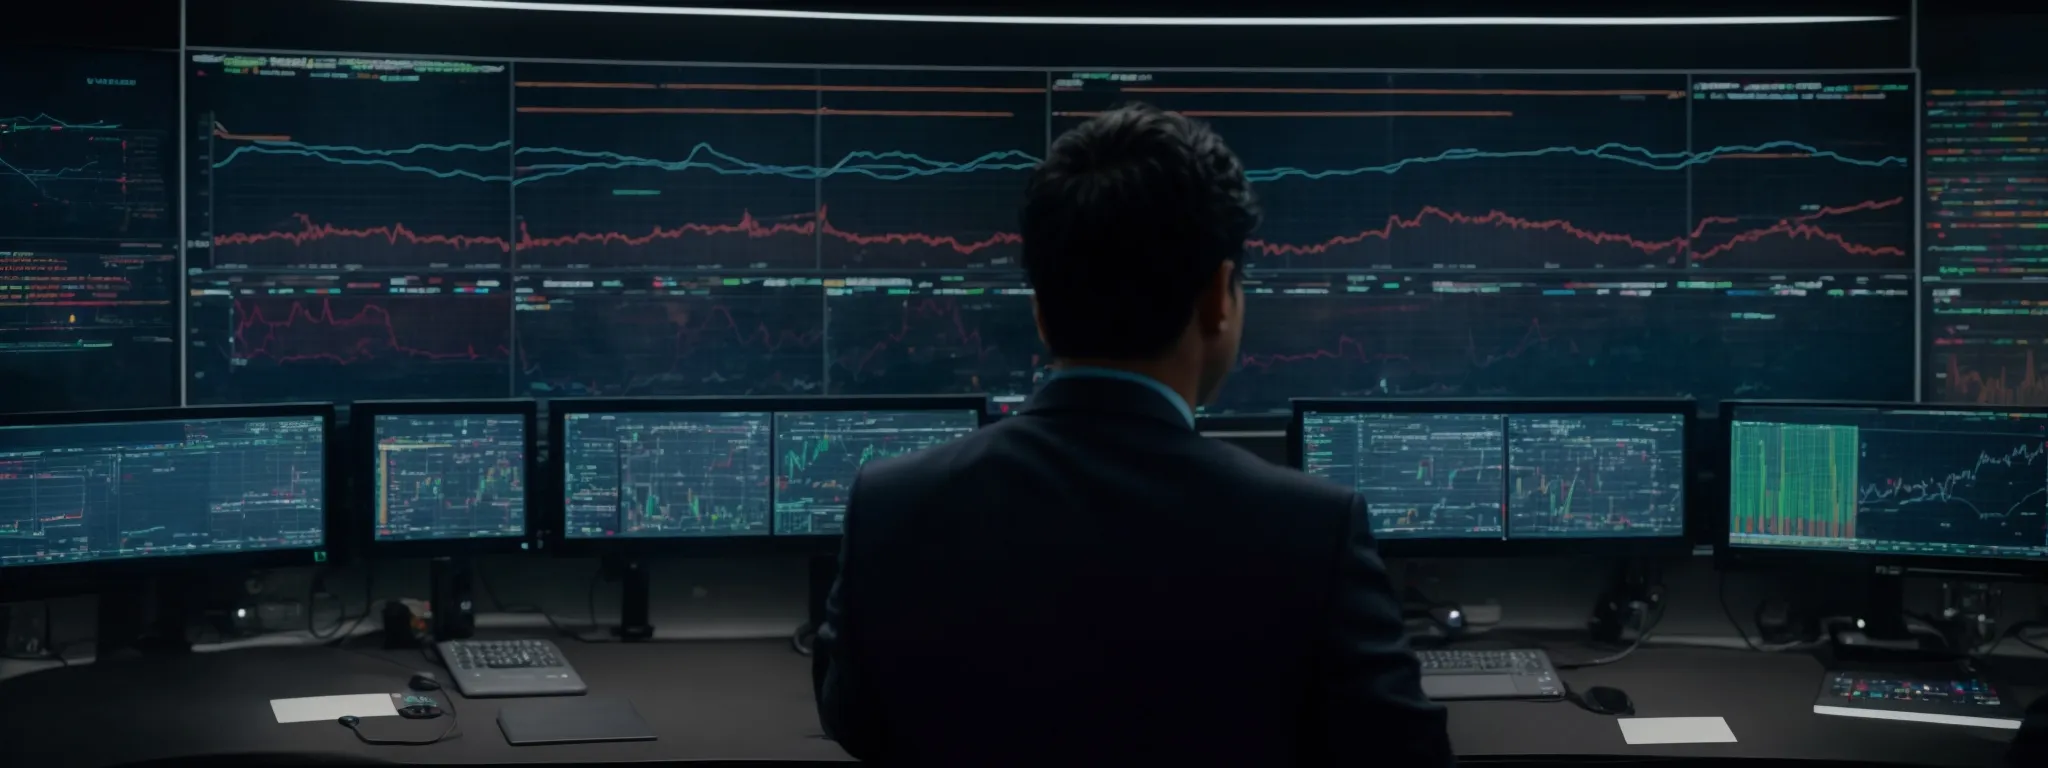 a person in a modern, high-tech control room, overlooking a wall of screens displaying various data visualizations and charts.